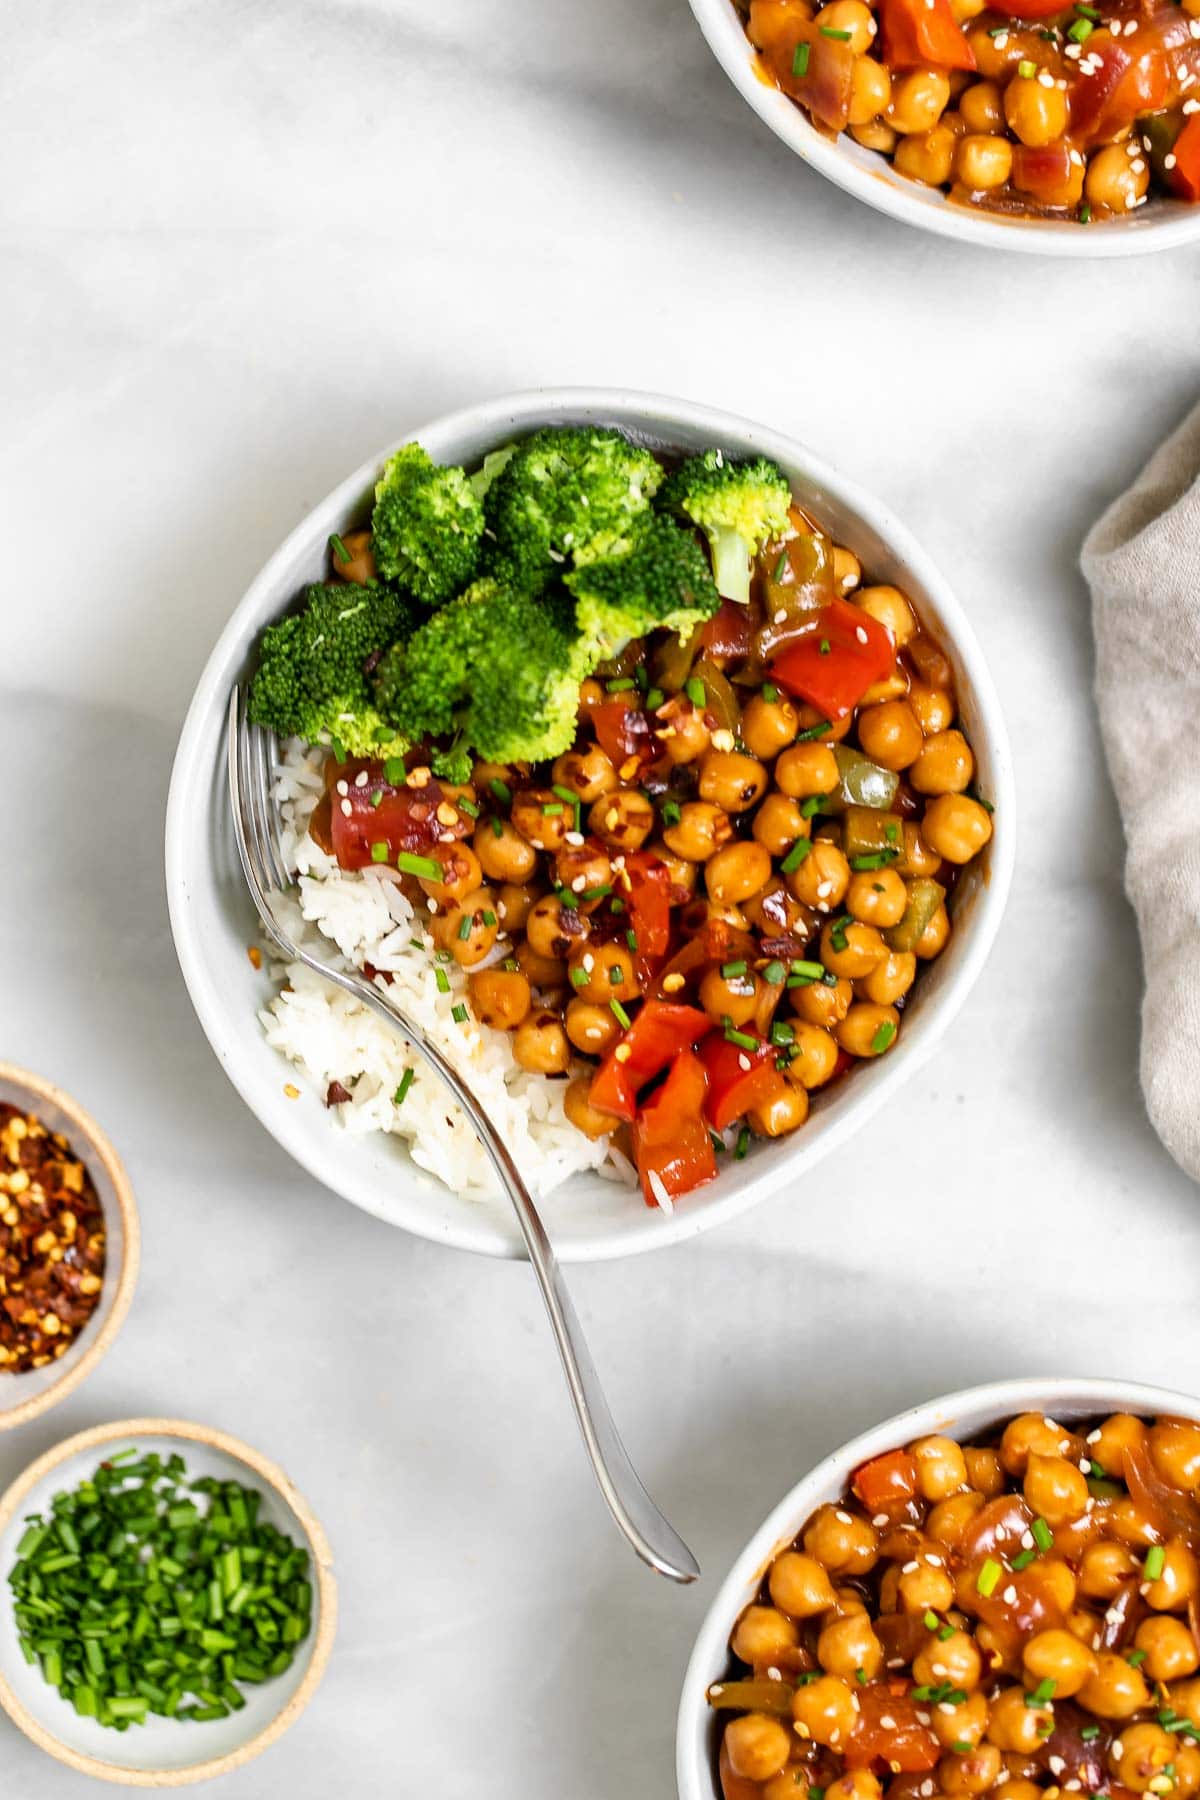 Chickpea stir fry with broccoli and rice in three bowls.